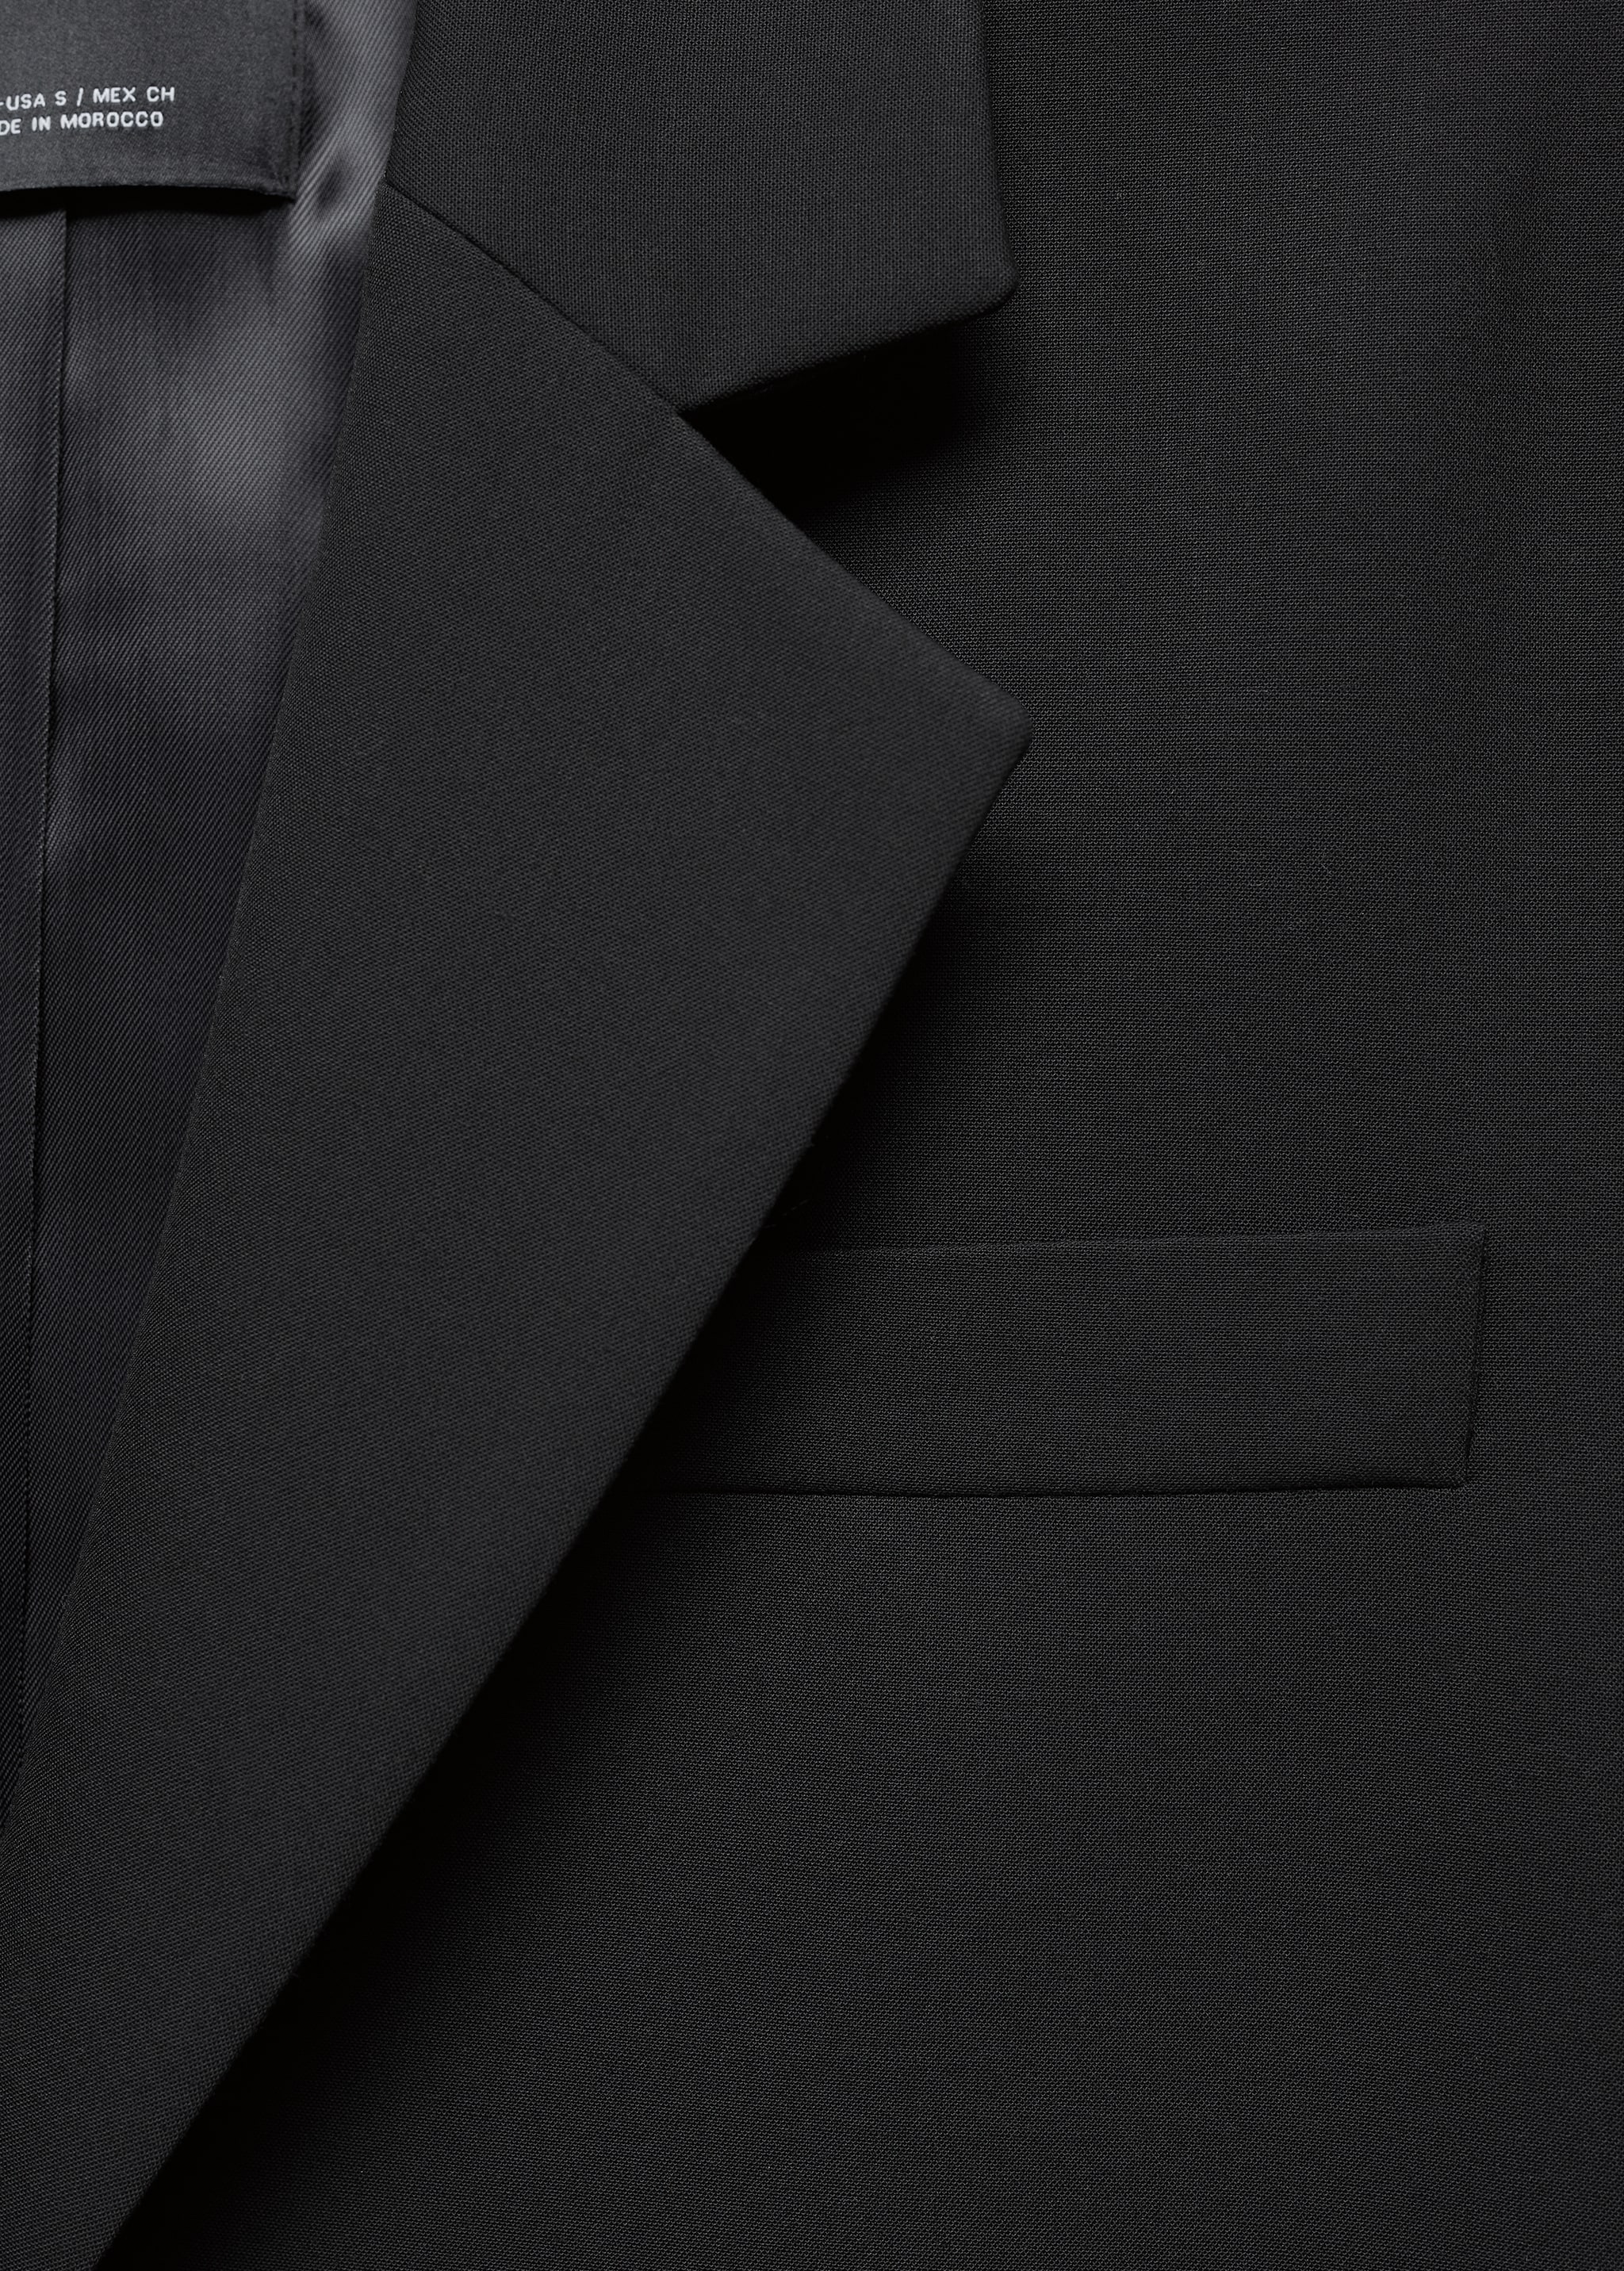 Suit jacket with buttons - Details of the article 8